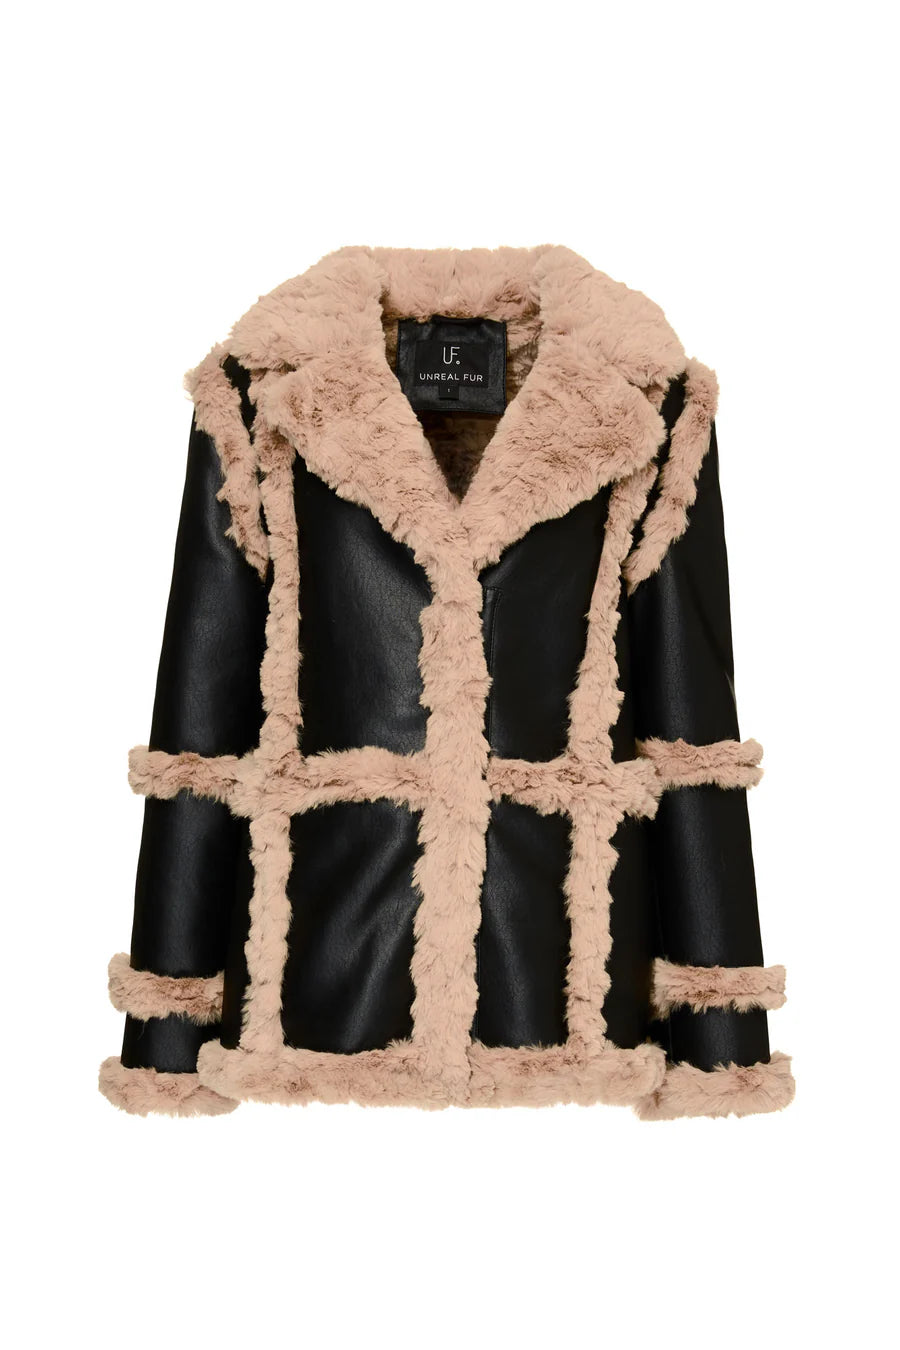 UNREAL FUR - Gate Keeper Jacket - Magpie Style